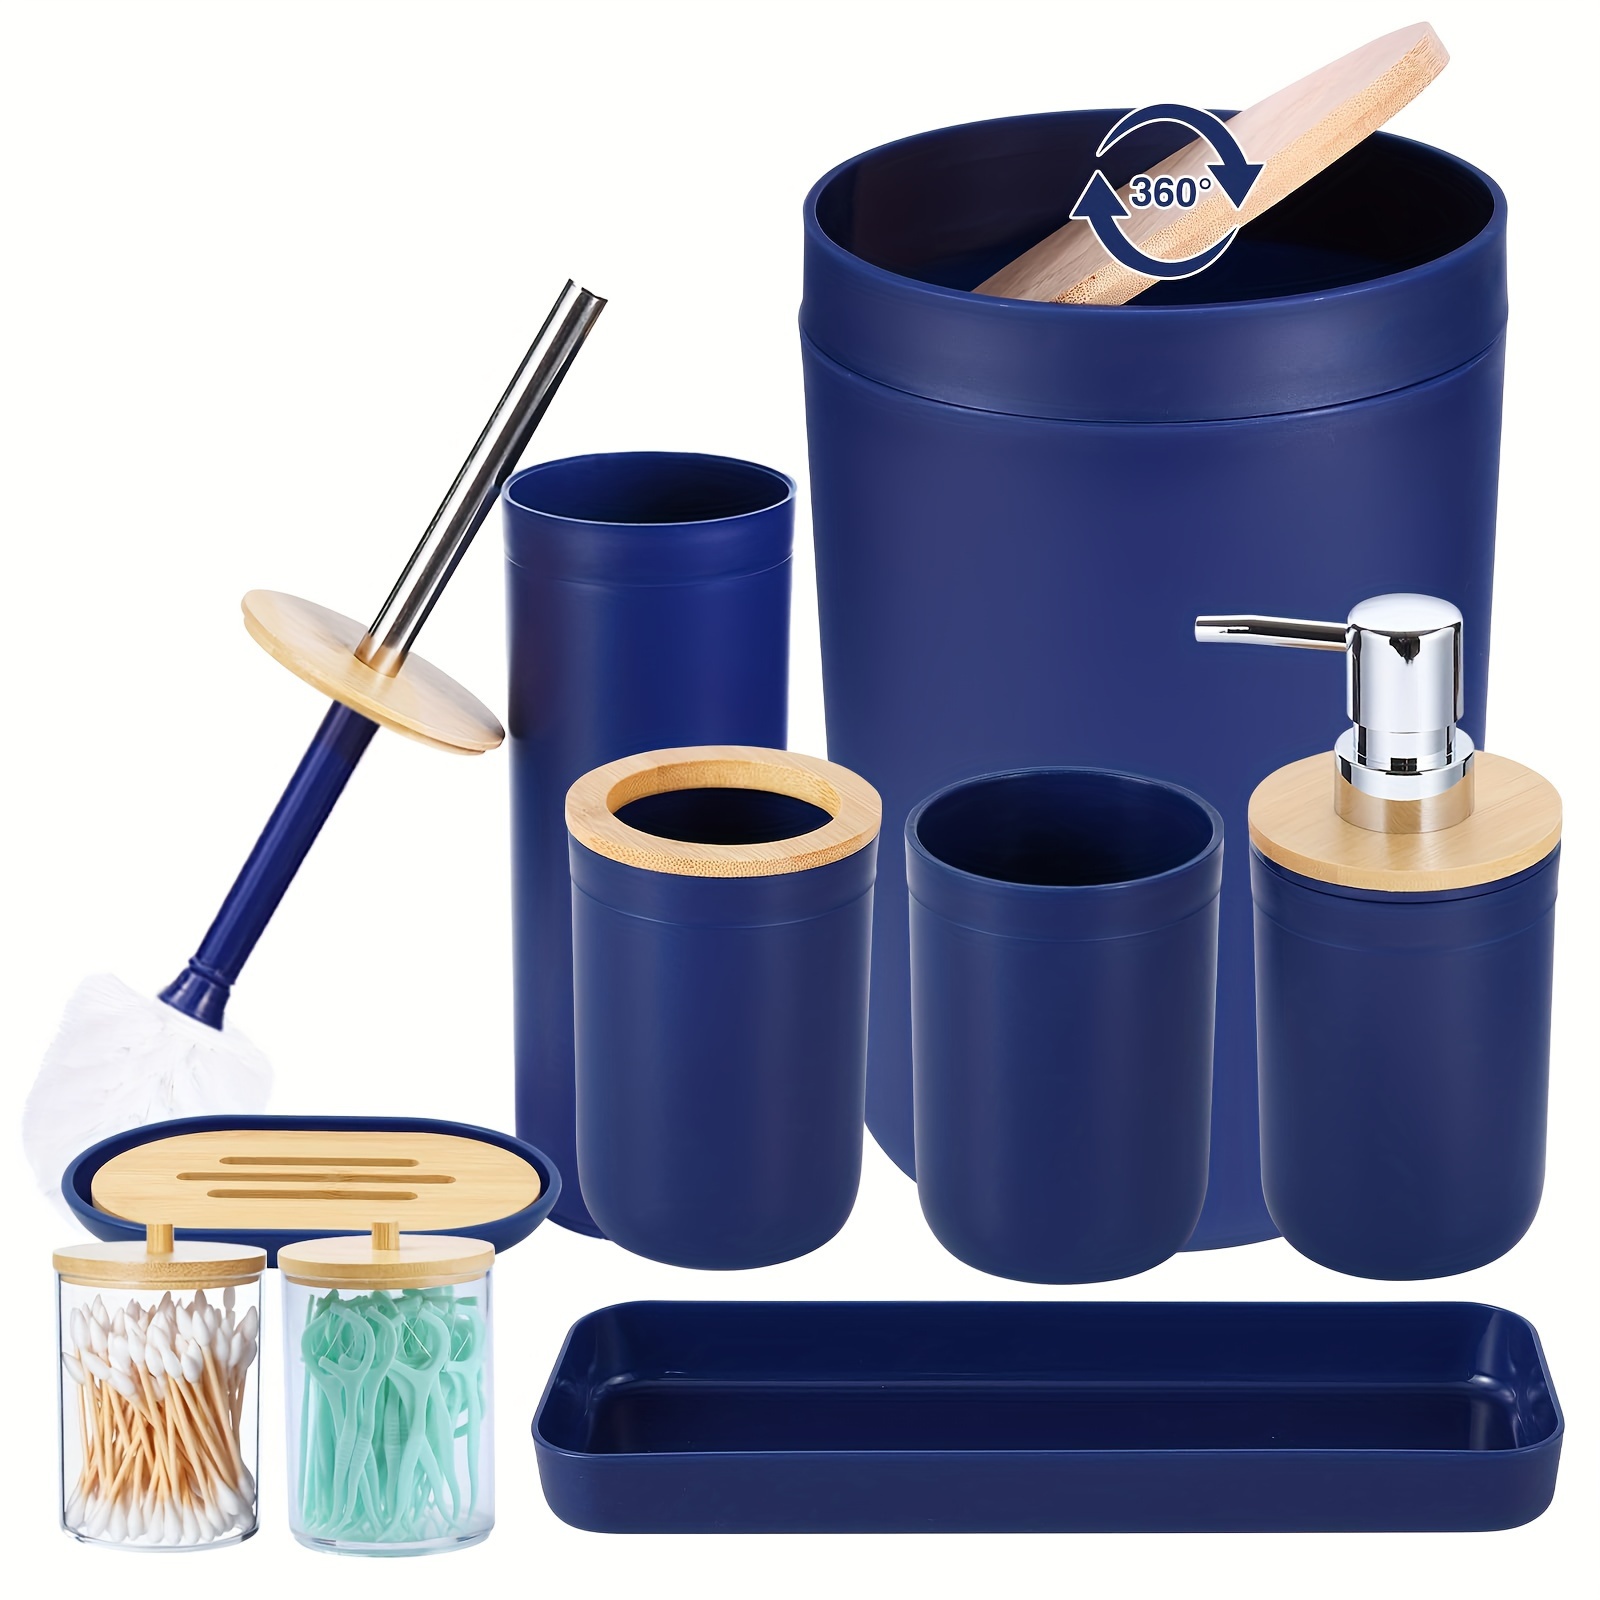 

9pcs Beige Bamboo Cover Navy Bathroom Accessories Set - With Trash Can Toothbrush Holder Soap Dispenser Soap And Lotion Set Tumbler Cup